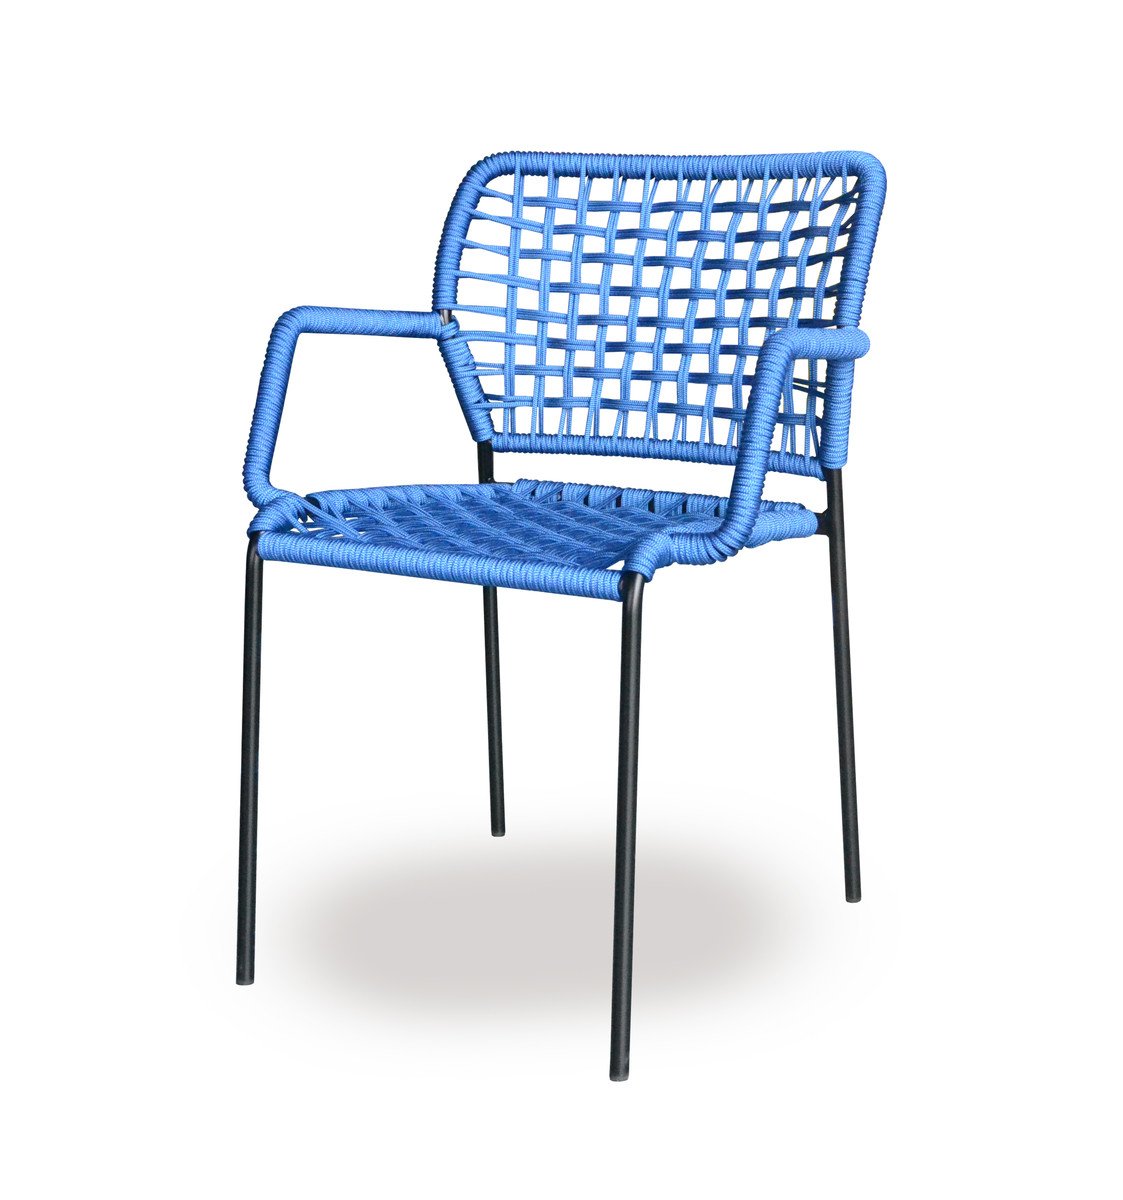 Corda Chair  from Tonon, designed by Cuno Frommherz